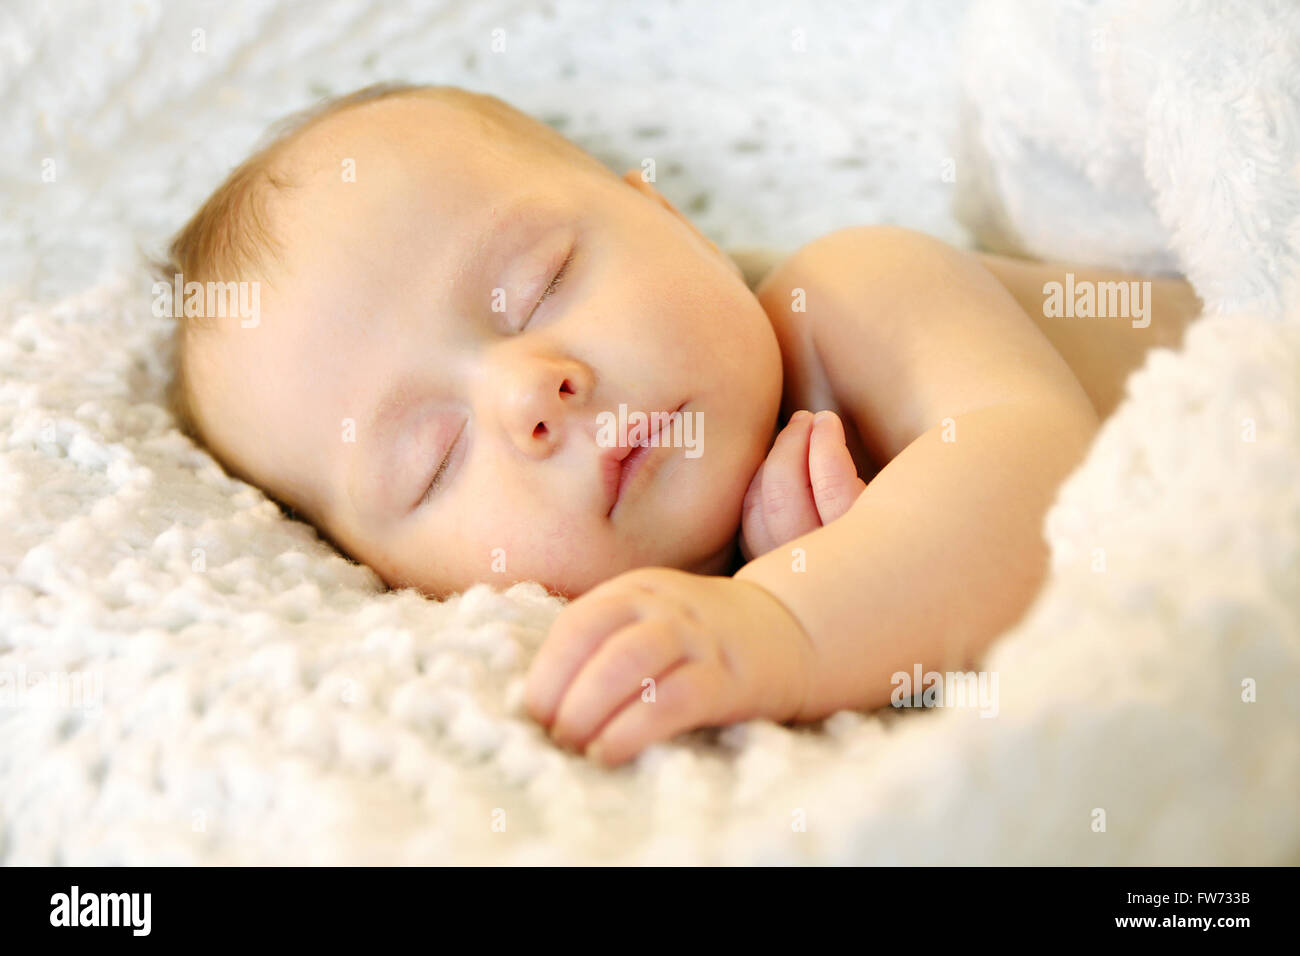 A sweet newborn infant girl is sleeping peacefully while snuggled in warm white blankets Stock Photo